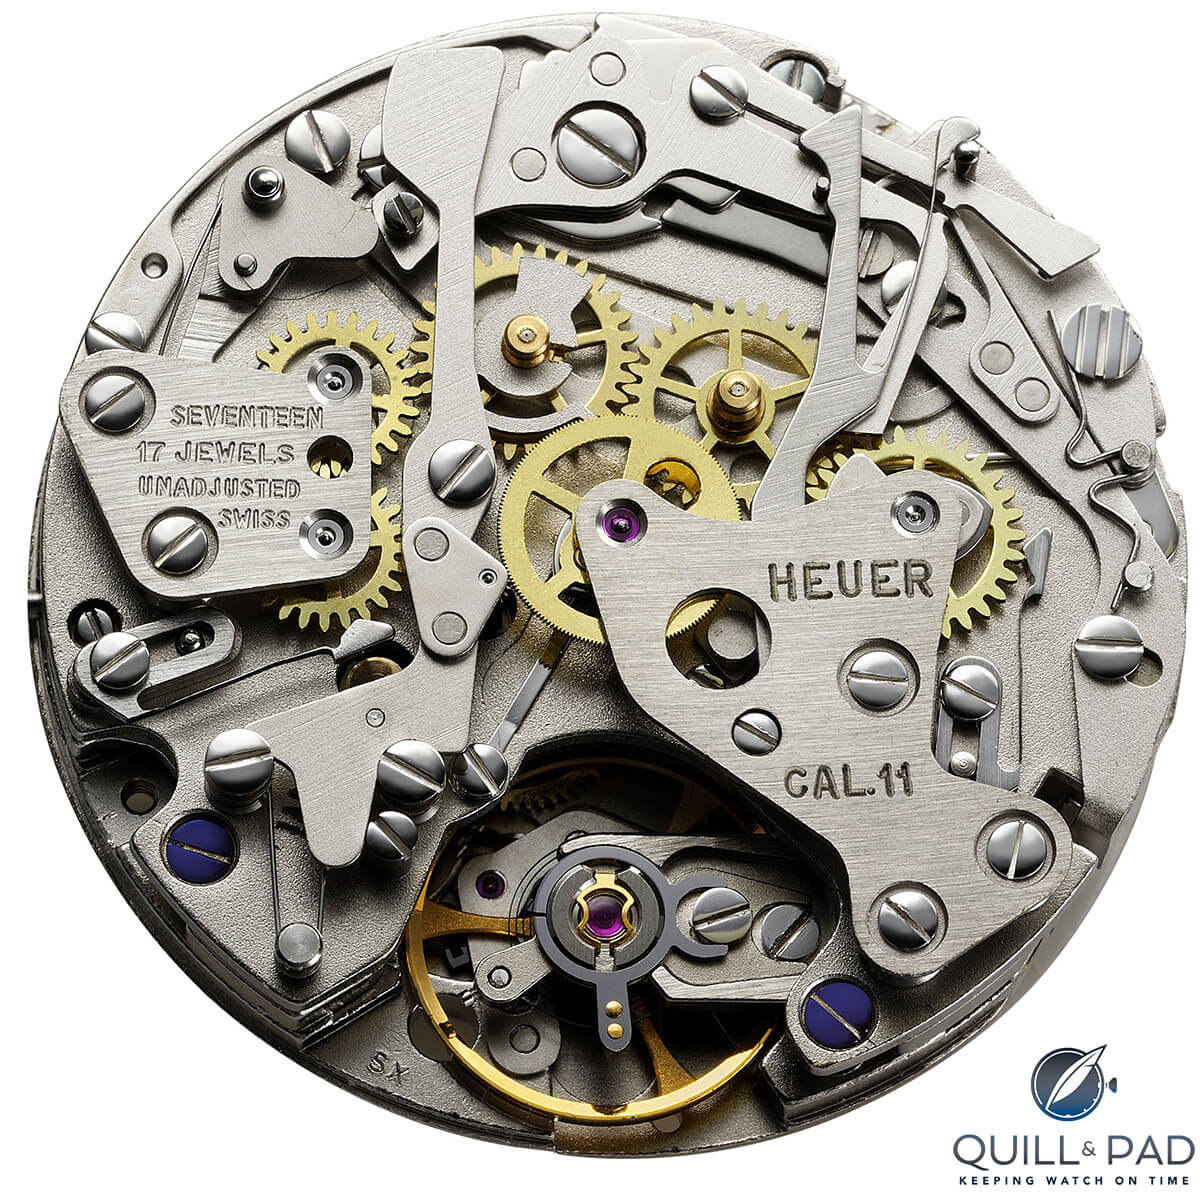 Heuer’s famous Caliber 11 of 1969, one of the first automatic chronographs